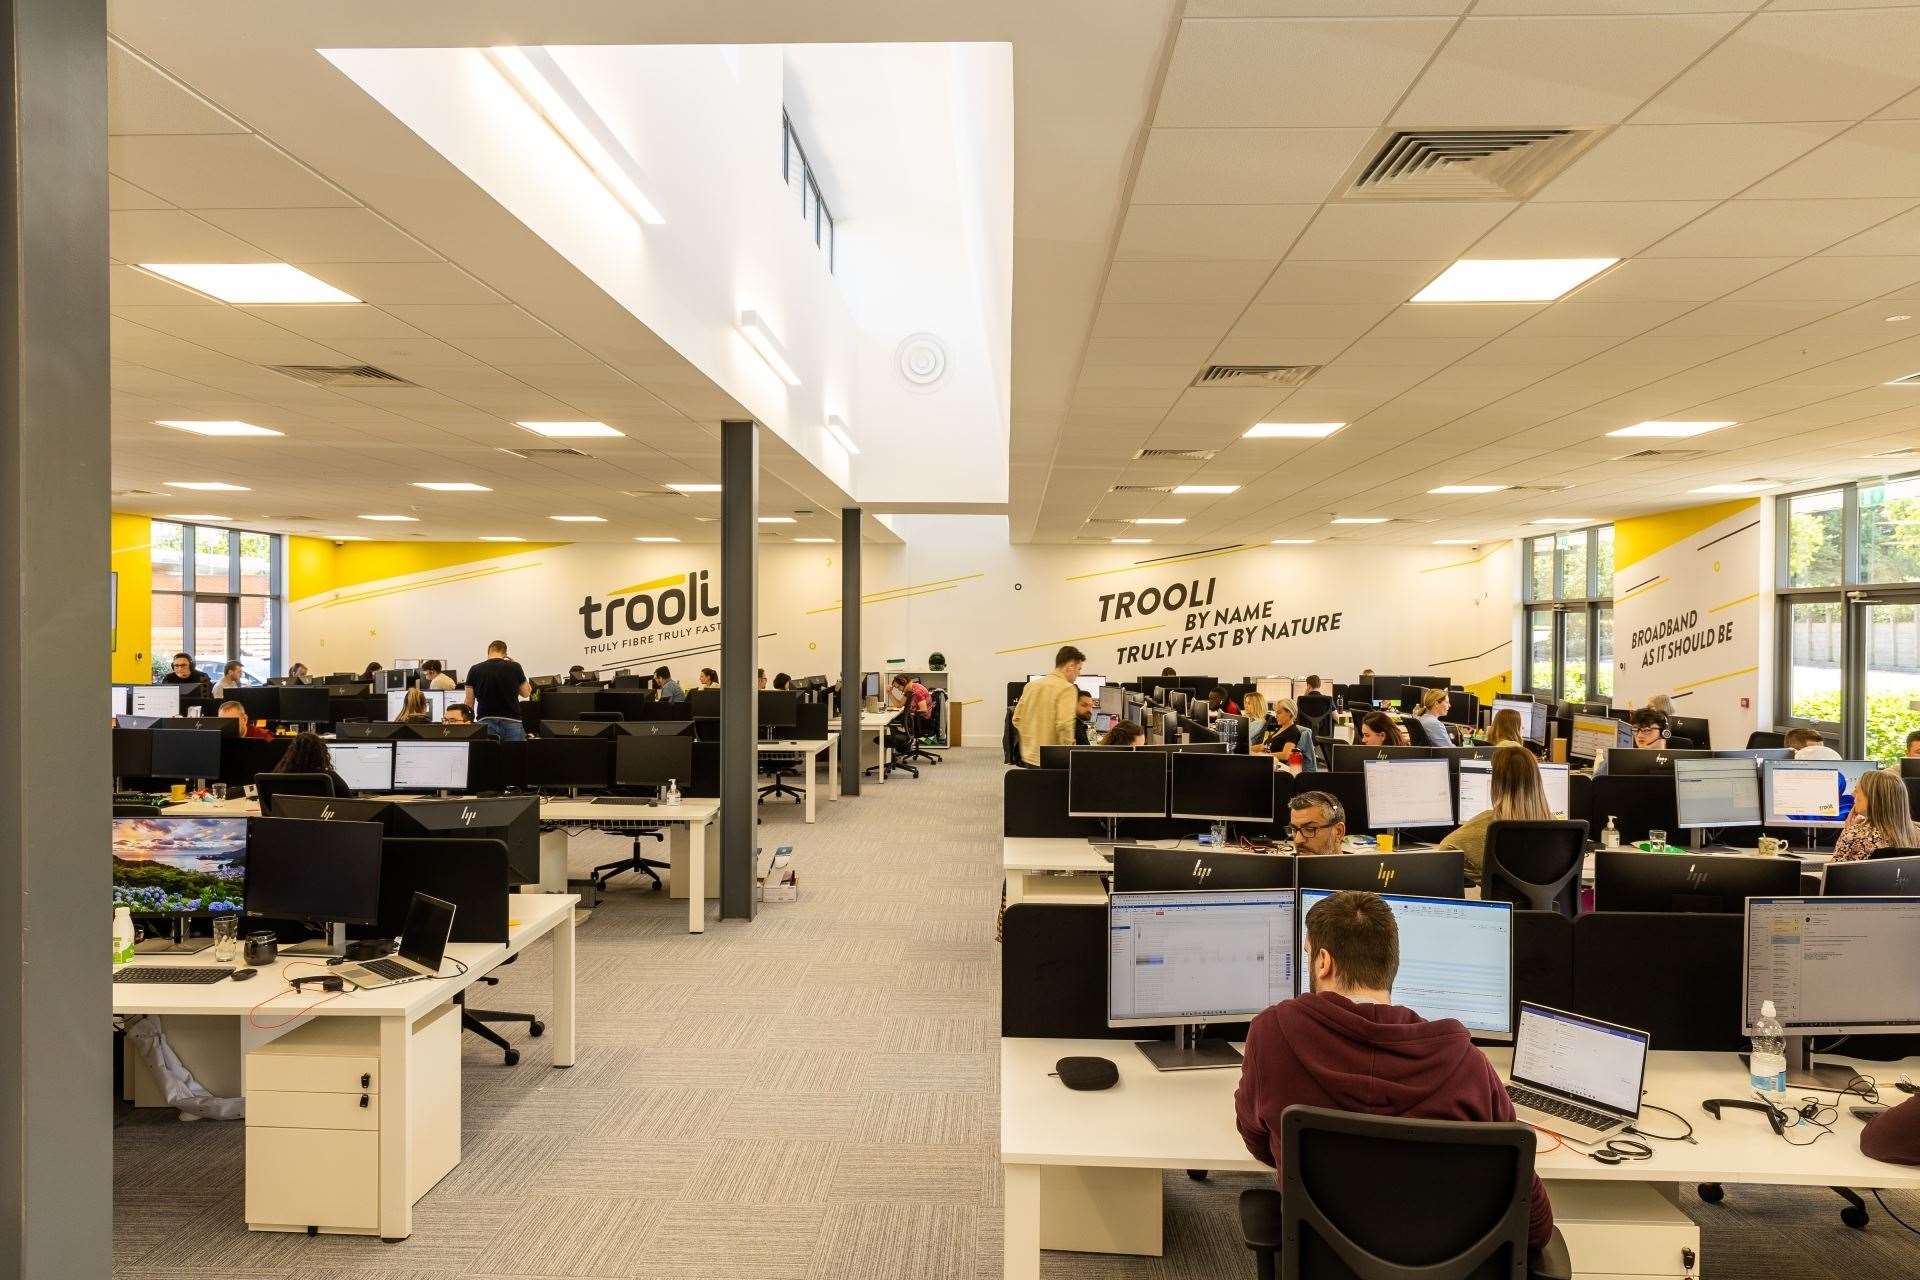 The new Trooli HQ is three times the size of its previous base